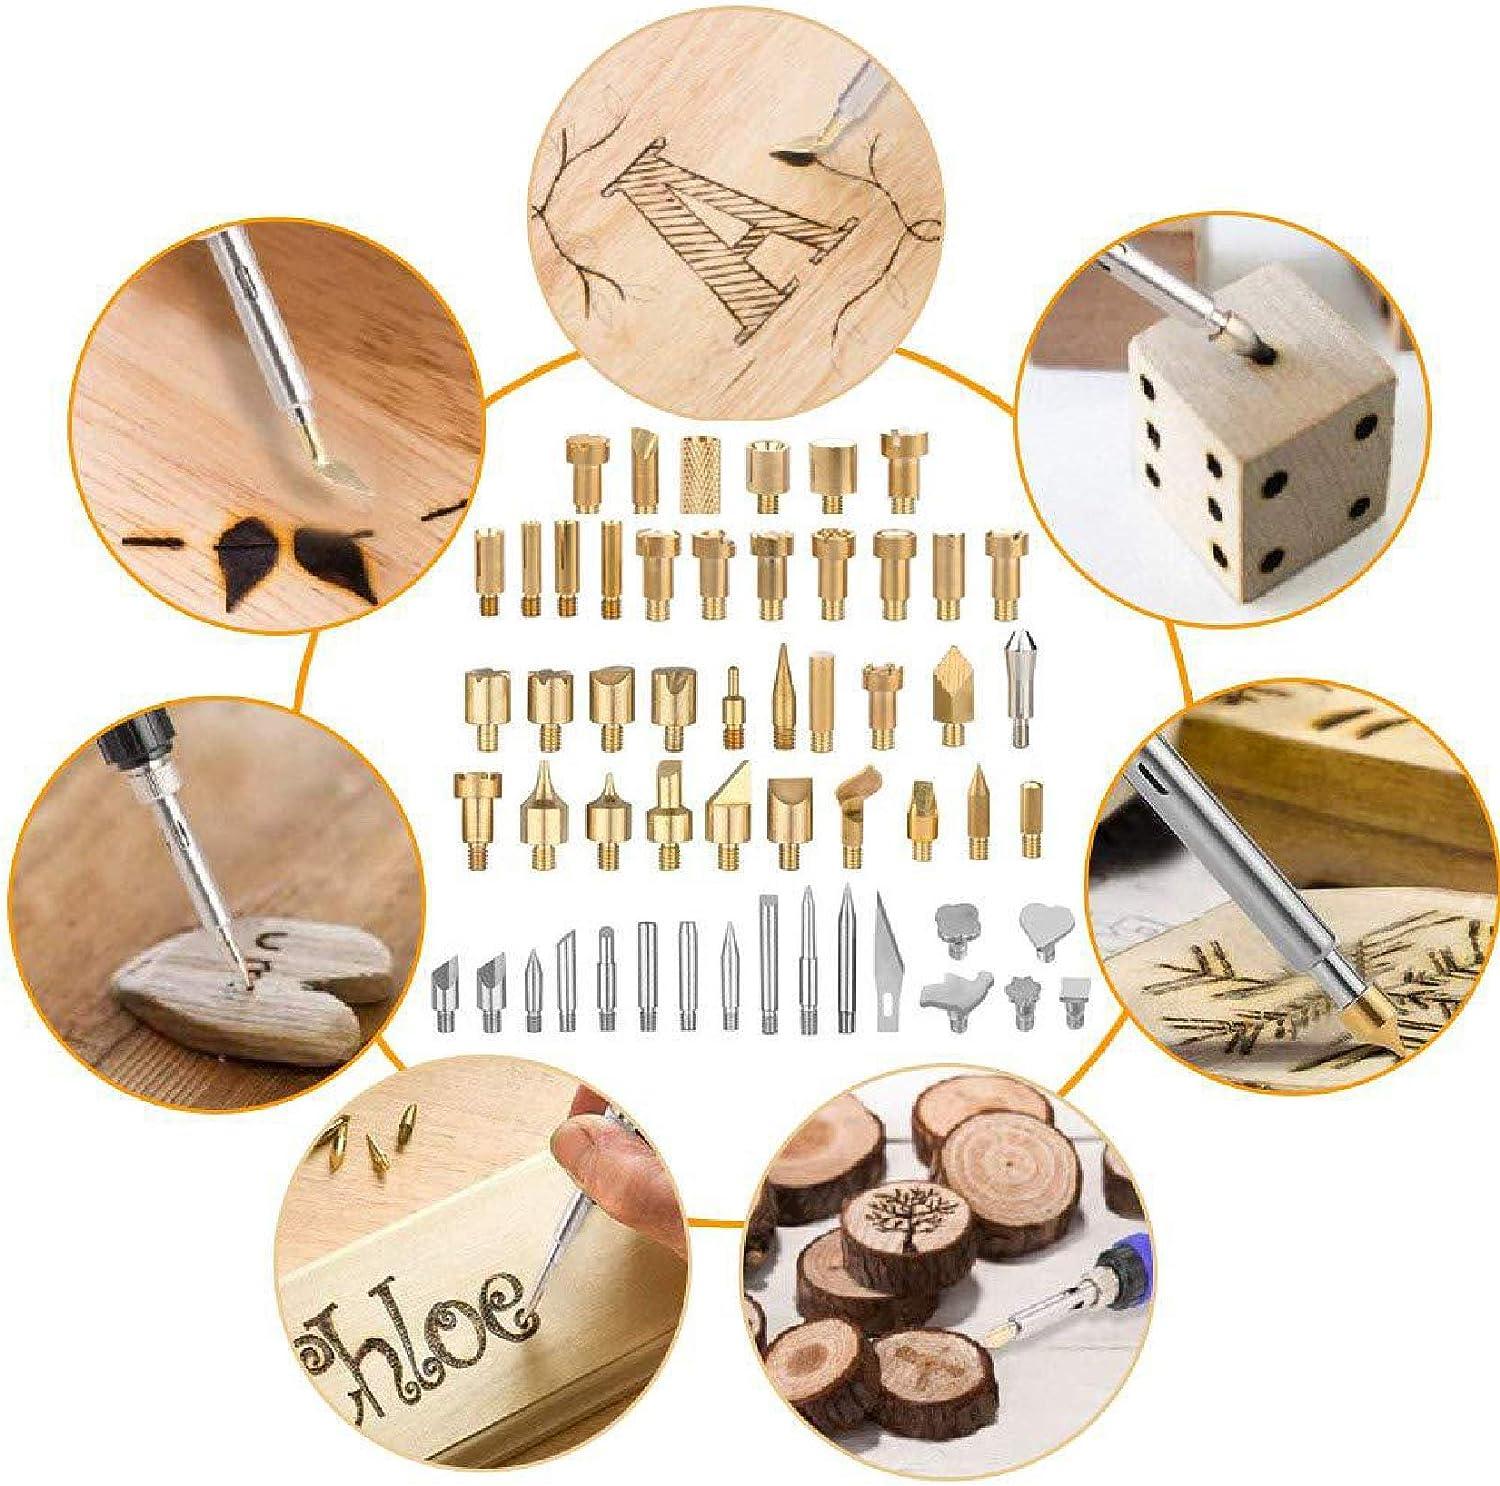 56 PCS Professional Wood Burner Accessories Tool for Pyrography Pen Wood  Embossing Carving DIY Crafts, Creative Tool Set WoodBurner for